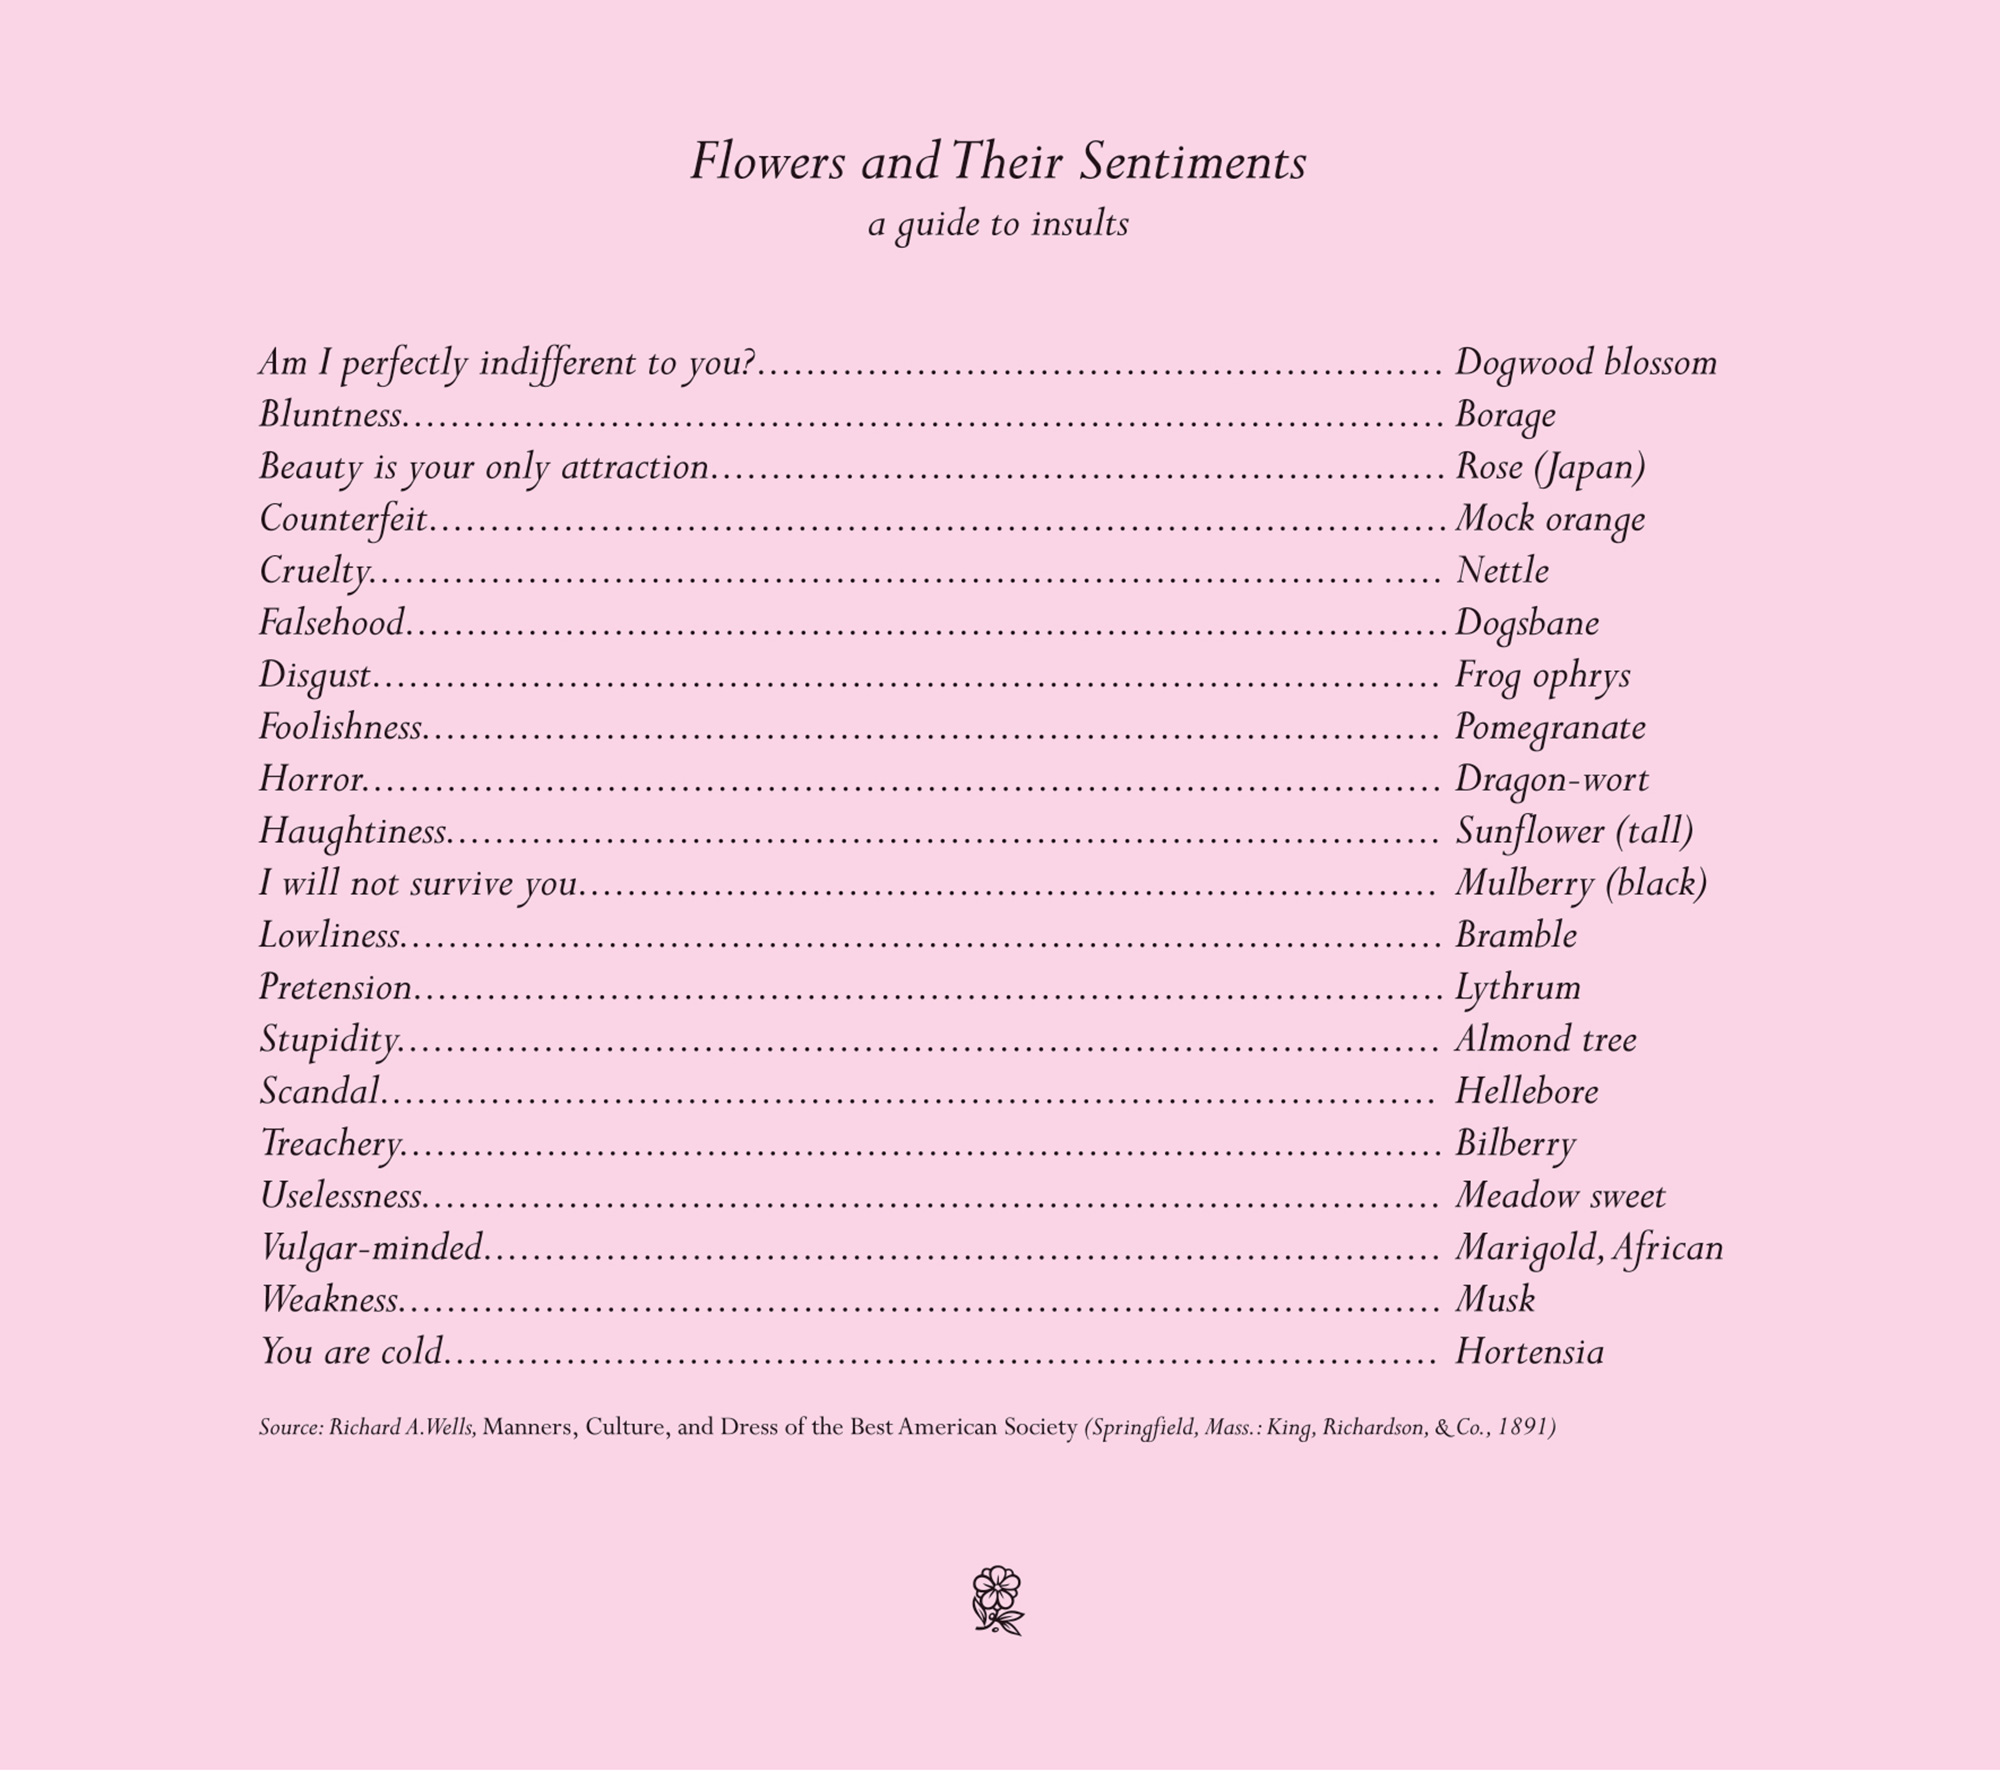 Flowers and Their Sentiments
A guide to insults

Am I perfectly indifferent to you? = Dogwood blossom
Bluntness = Borage
Beauty is your only attraction = Rose (Japan)
Counterfeit = Mock orange
Cruelty = Nettle
Falsehood = Digsbane
Disgust = Frog ophrys
Foolishness = Pomegranate
Horror = Dragon-wort
Haughtiness = Sunflower (tall)
I will not survive you = Mulberry (black)
Lowliness = Bramble
Pretension = Lythrum
Stupidity = Almond tree
Scandal = Hellebore
Treachery = Bilberry
Uselessness = Meadow sweet
Vulgar-minded = Marigold, African
Weakness = Musk
You are cold = Hortensia

Source: Richard A. Wells, “Manners, Culture, and Dress of the Best American Society” (Springfield, Mass.: King, Richardson, & Company, 1891).
